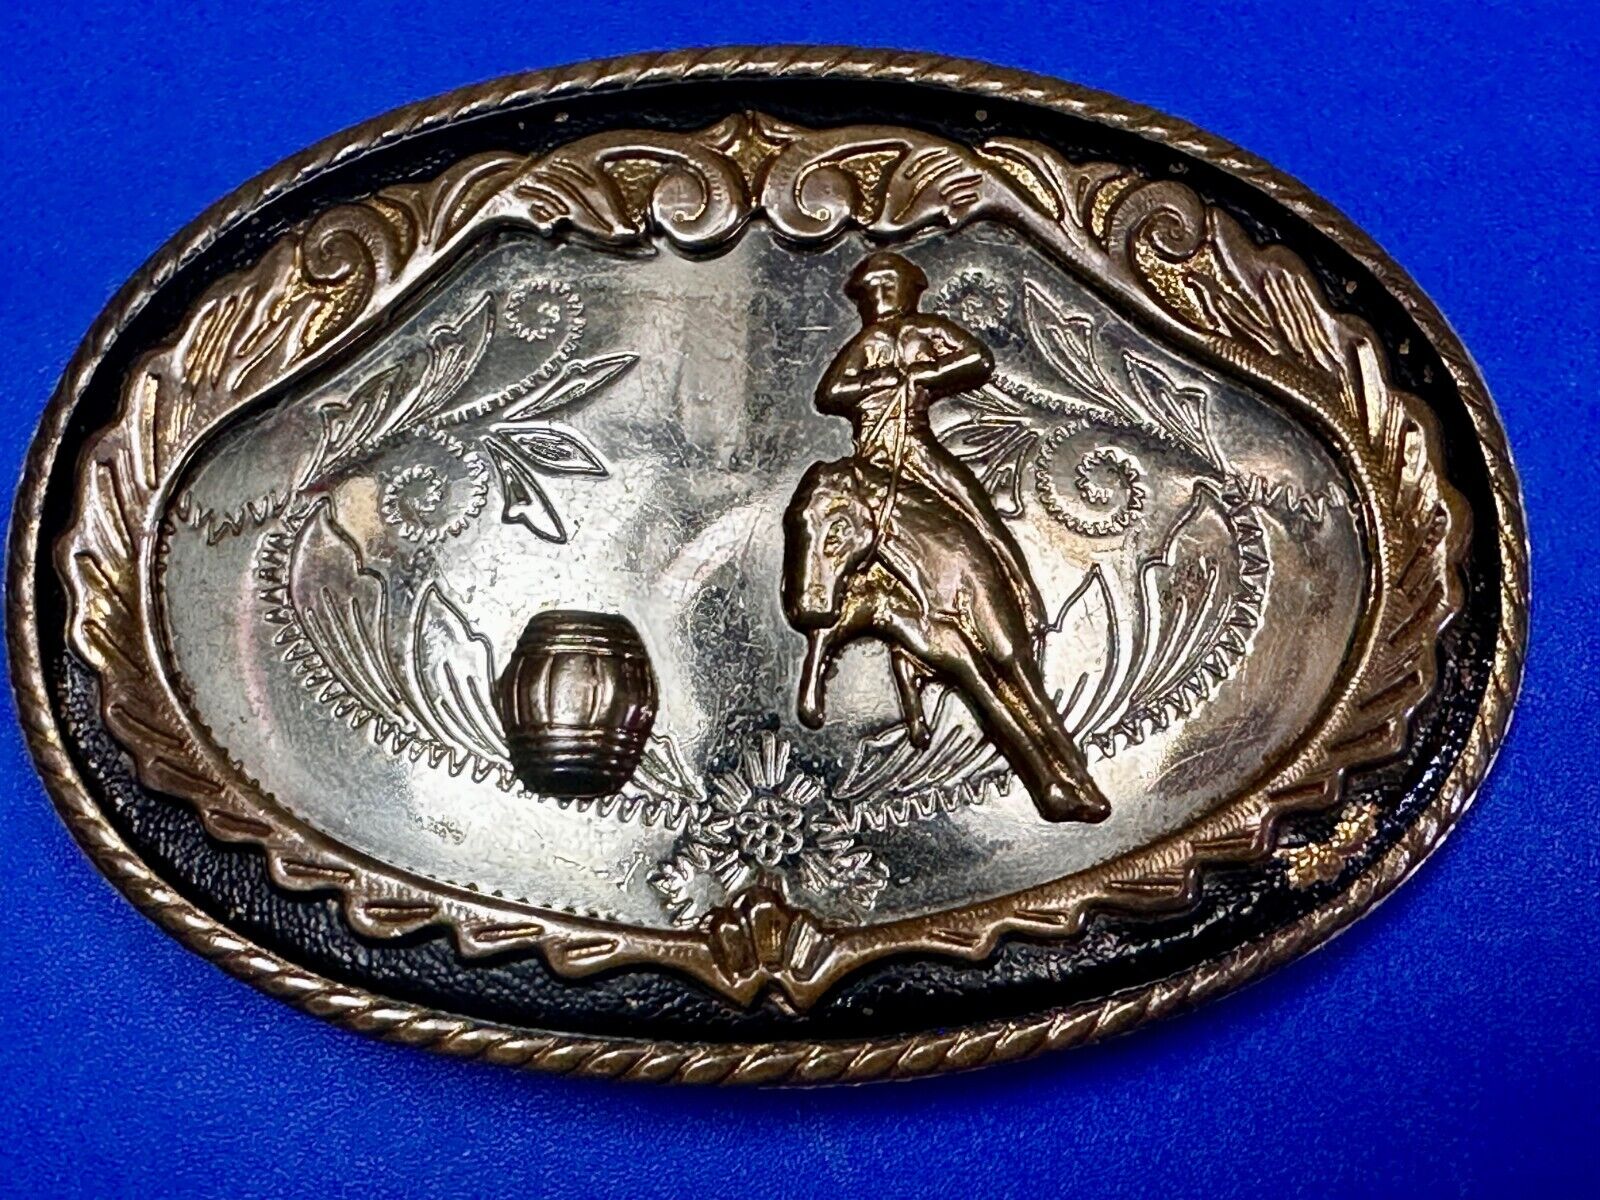 Vintage Barrel Racing Award Style German Silver Belt Buckle with Black Accents